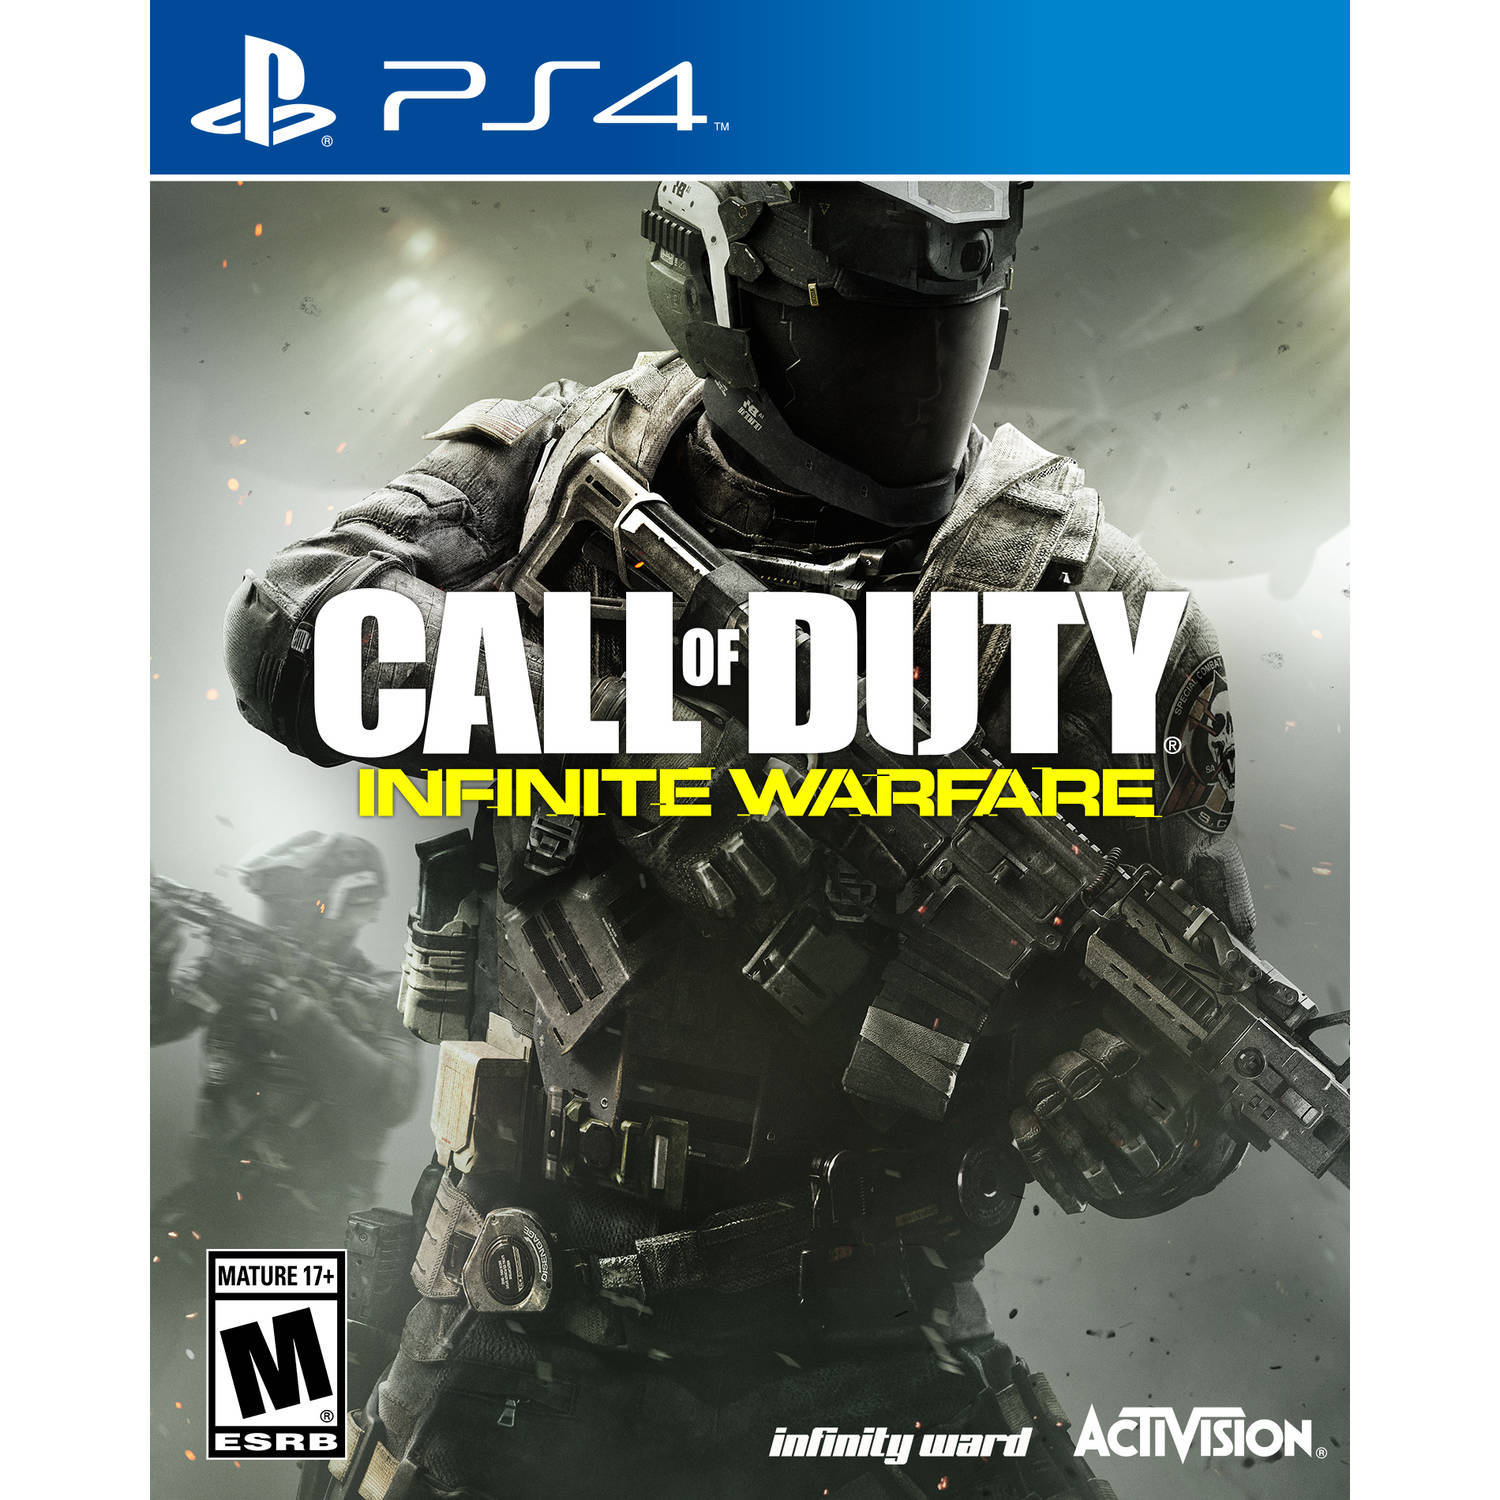 Call of Duty: Infinite Warfare PlayStation 4 Activision Video Games (Brand New)